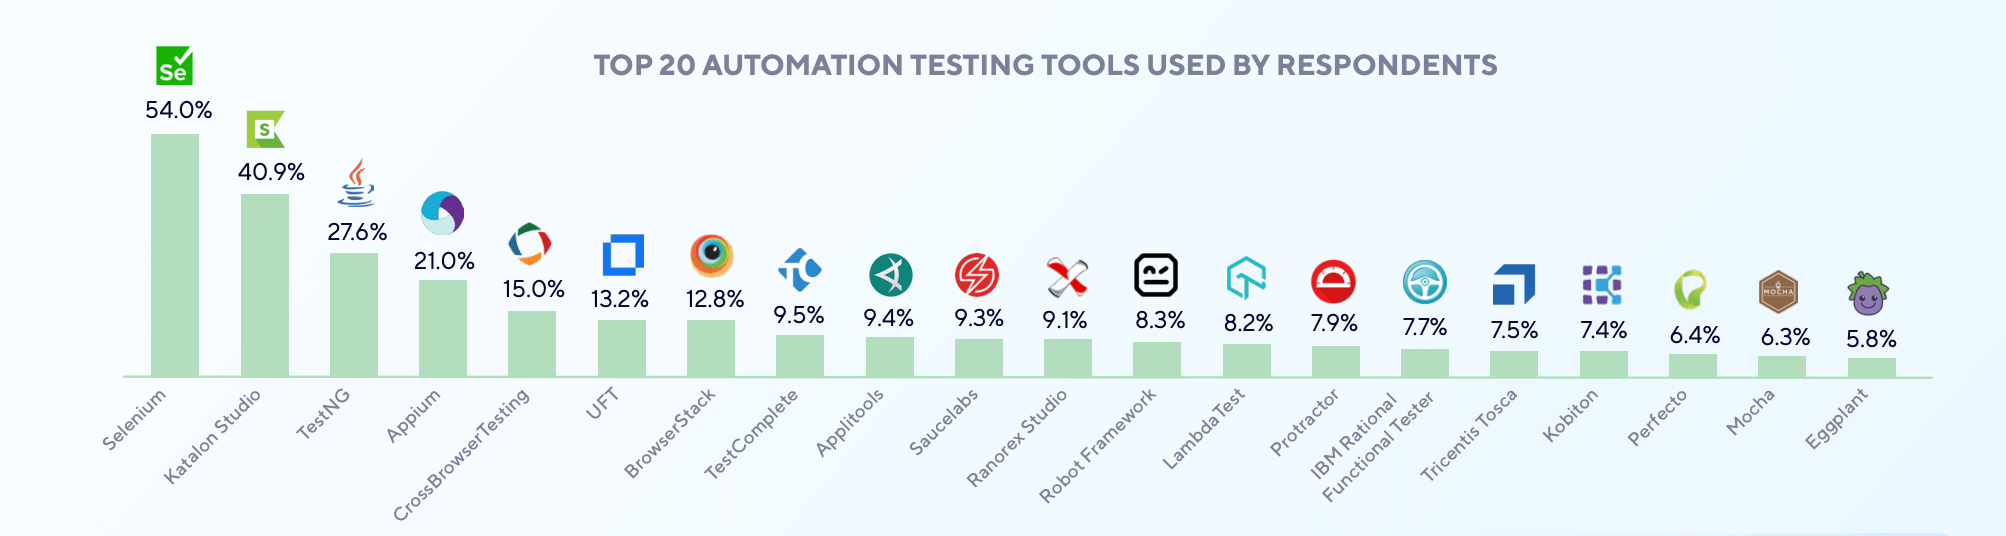 This image shows the top 20 automation tools used for agile delivery. Top 3 tools are Selenium, Katalon Studio, and TestNG. 